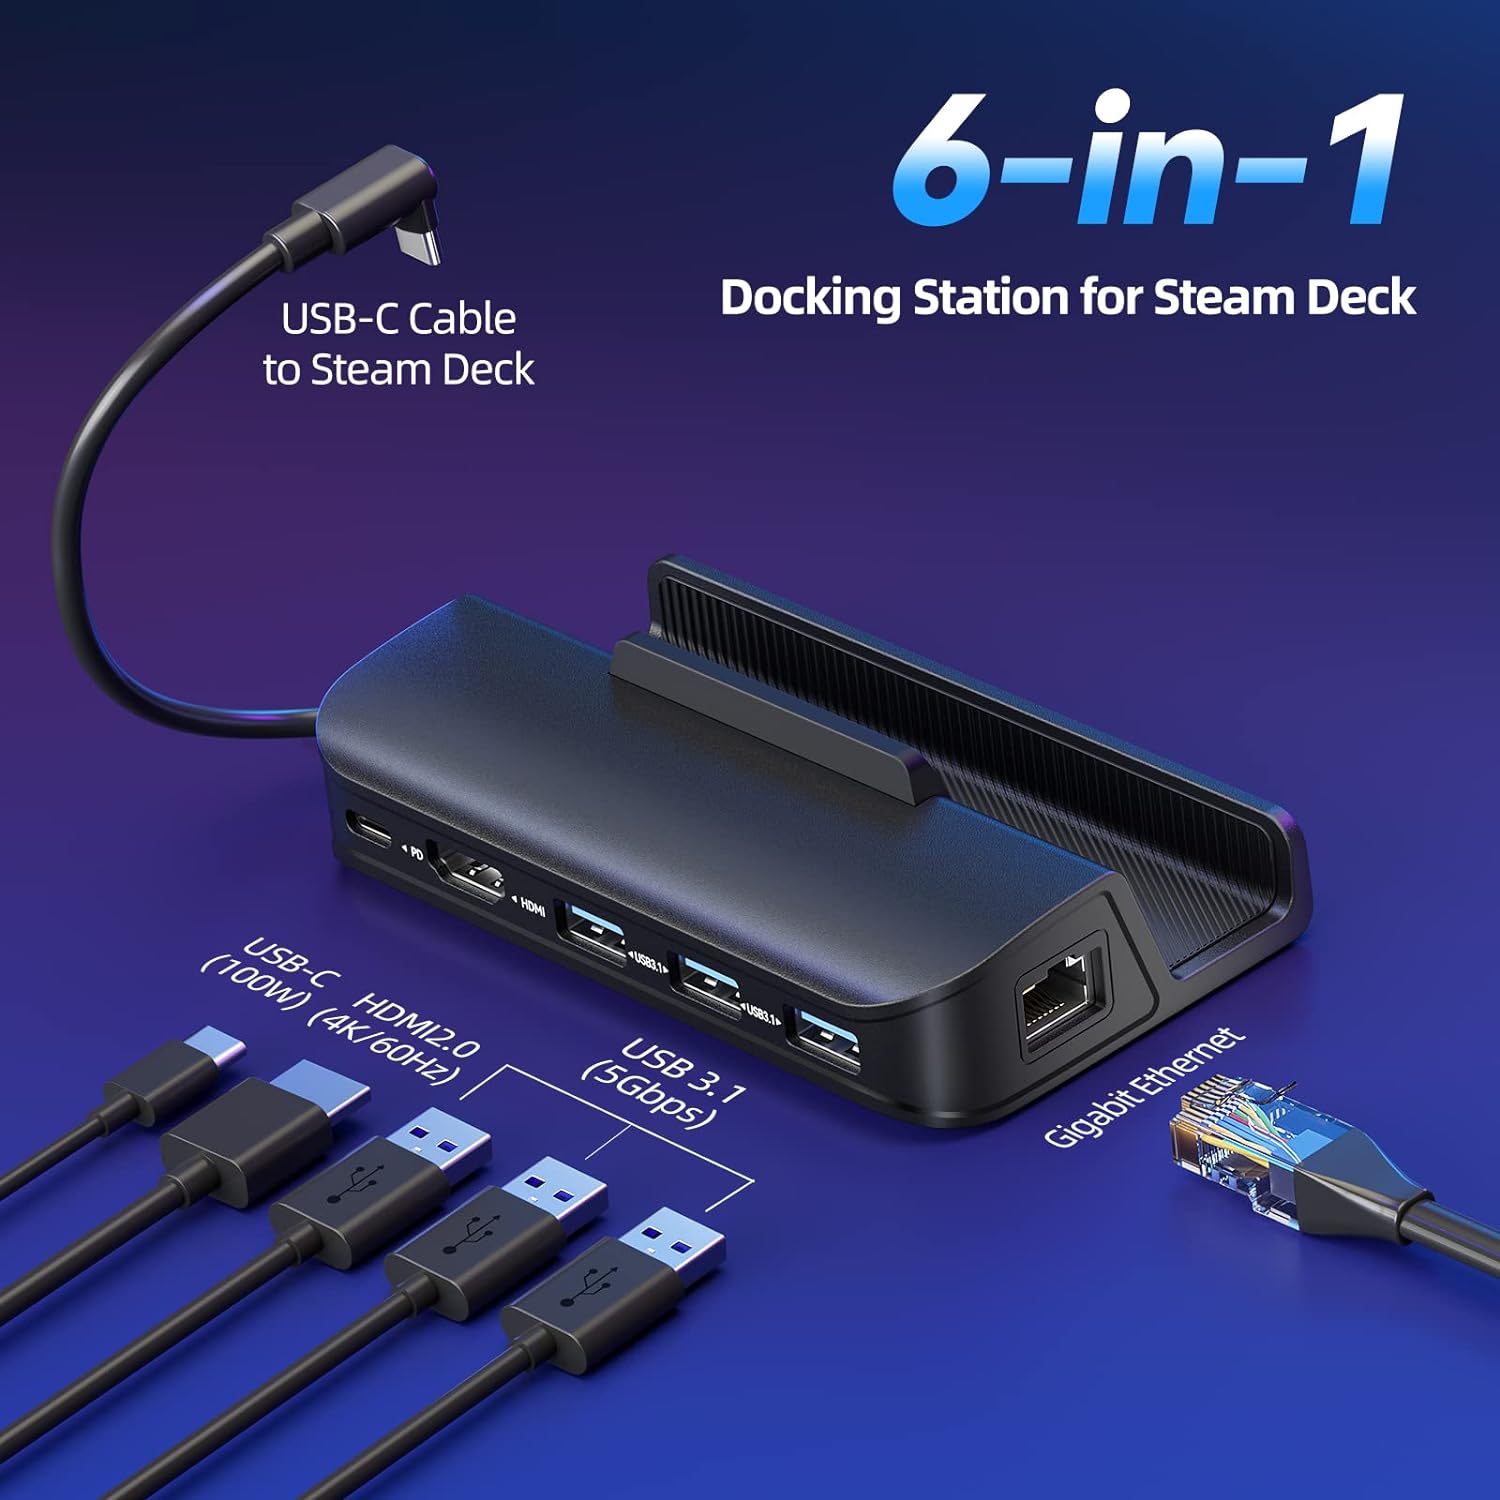 6-in-1 Docking Station for Steam Deck